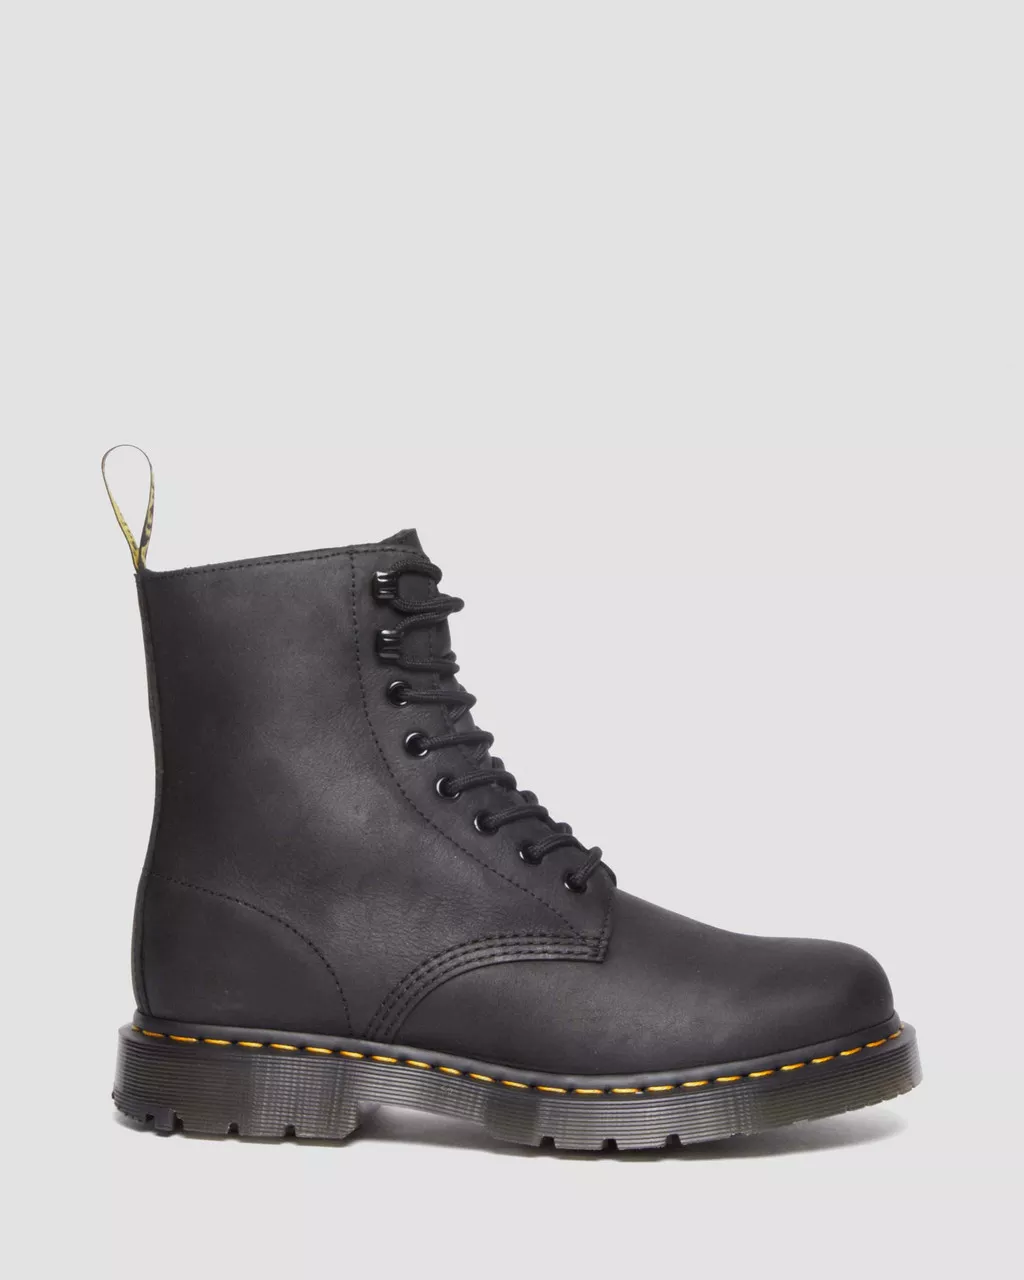 Dr. Martens - 1460 PASCAL WINTERGRIP - Black (Outlaw WP)